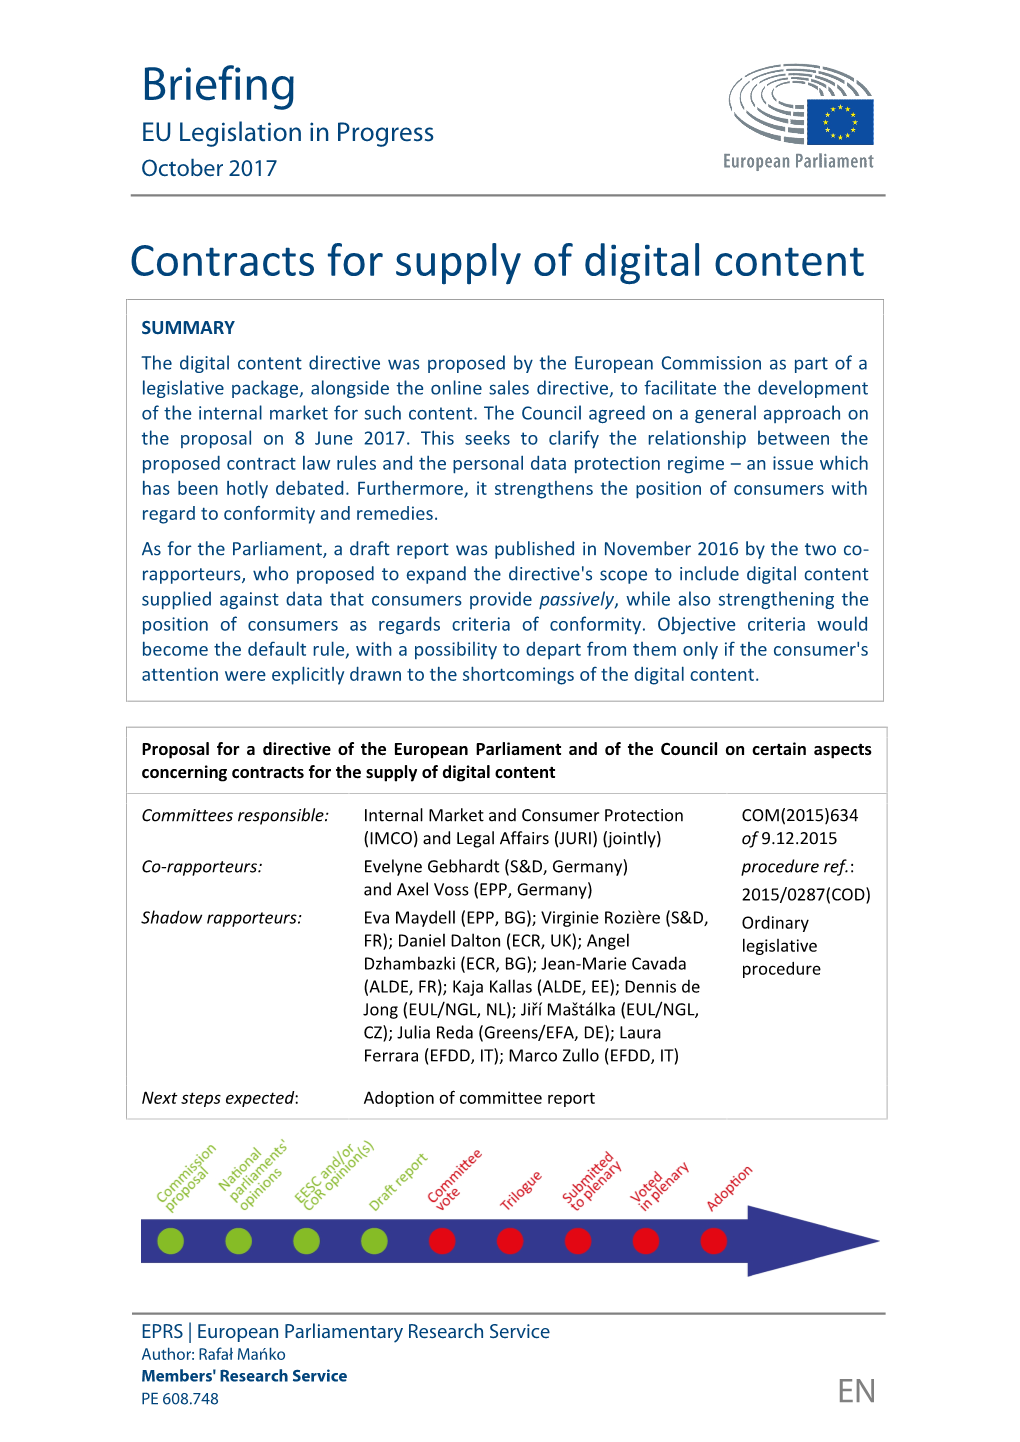 Contracts for the Supply of Digital Content to Consumers